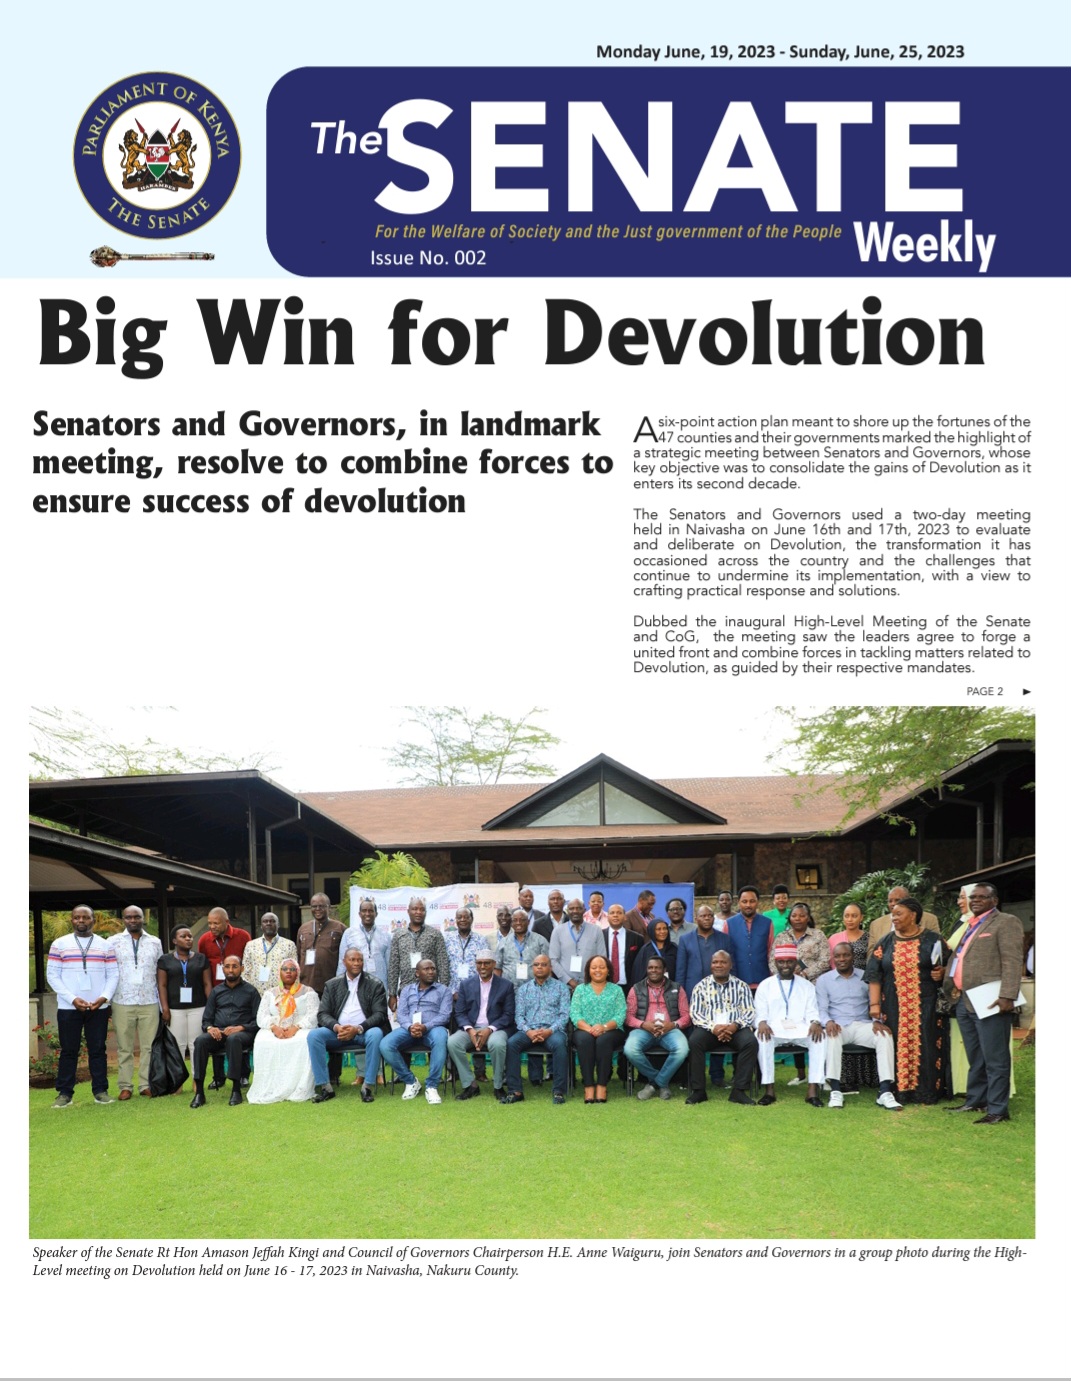 THE SENATE WEEKLY: Issue No.002